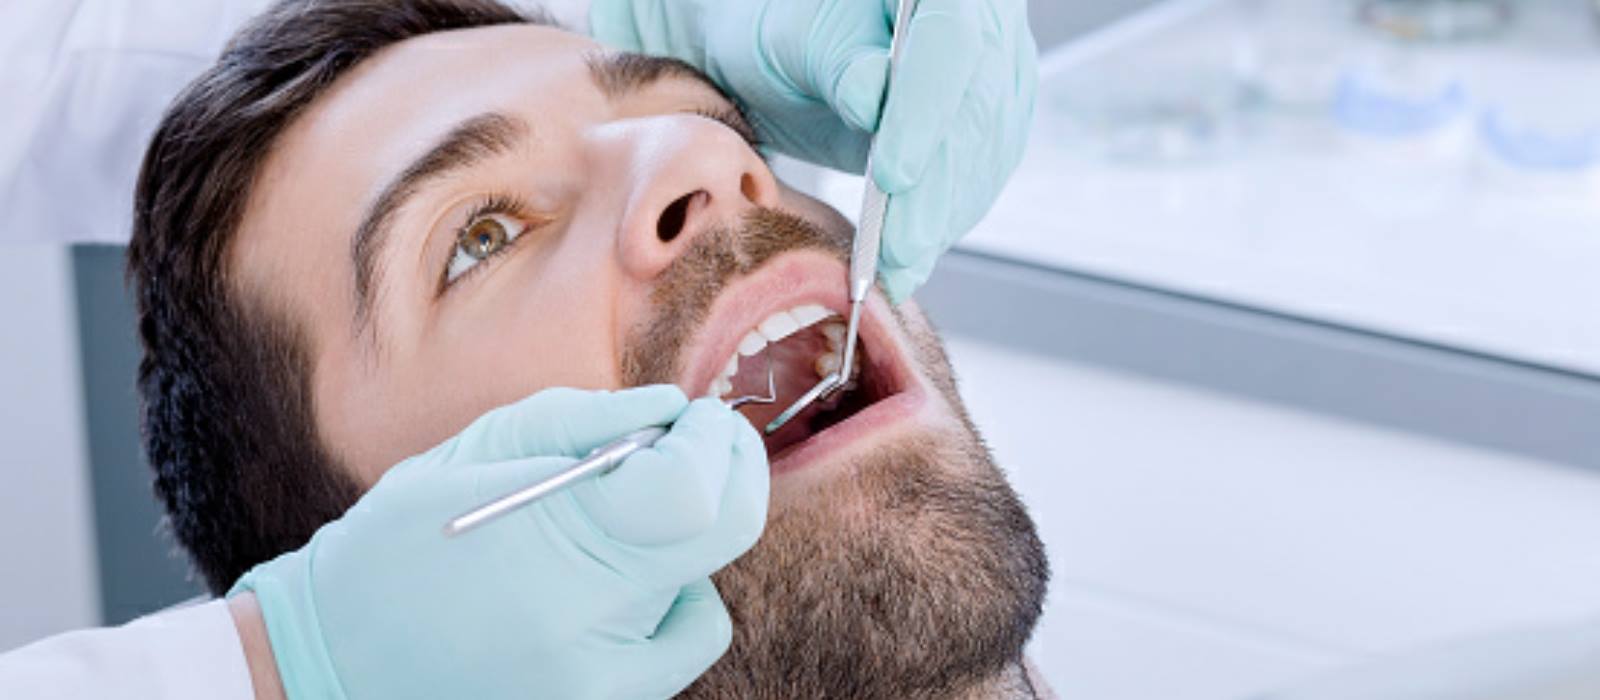 We have the best dentists for teeth cleaning here in North Ryde.